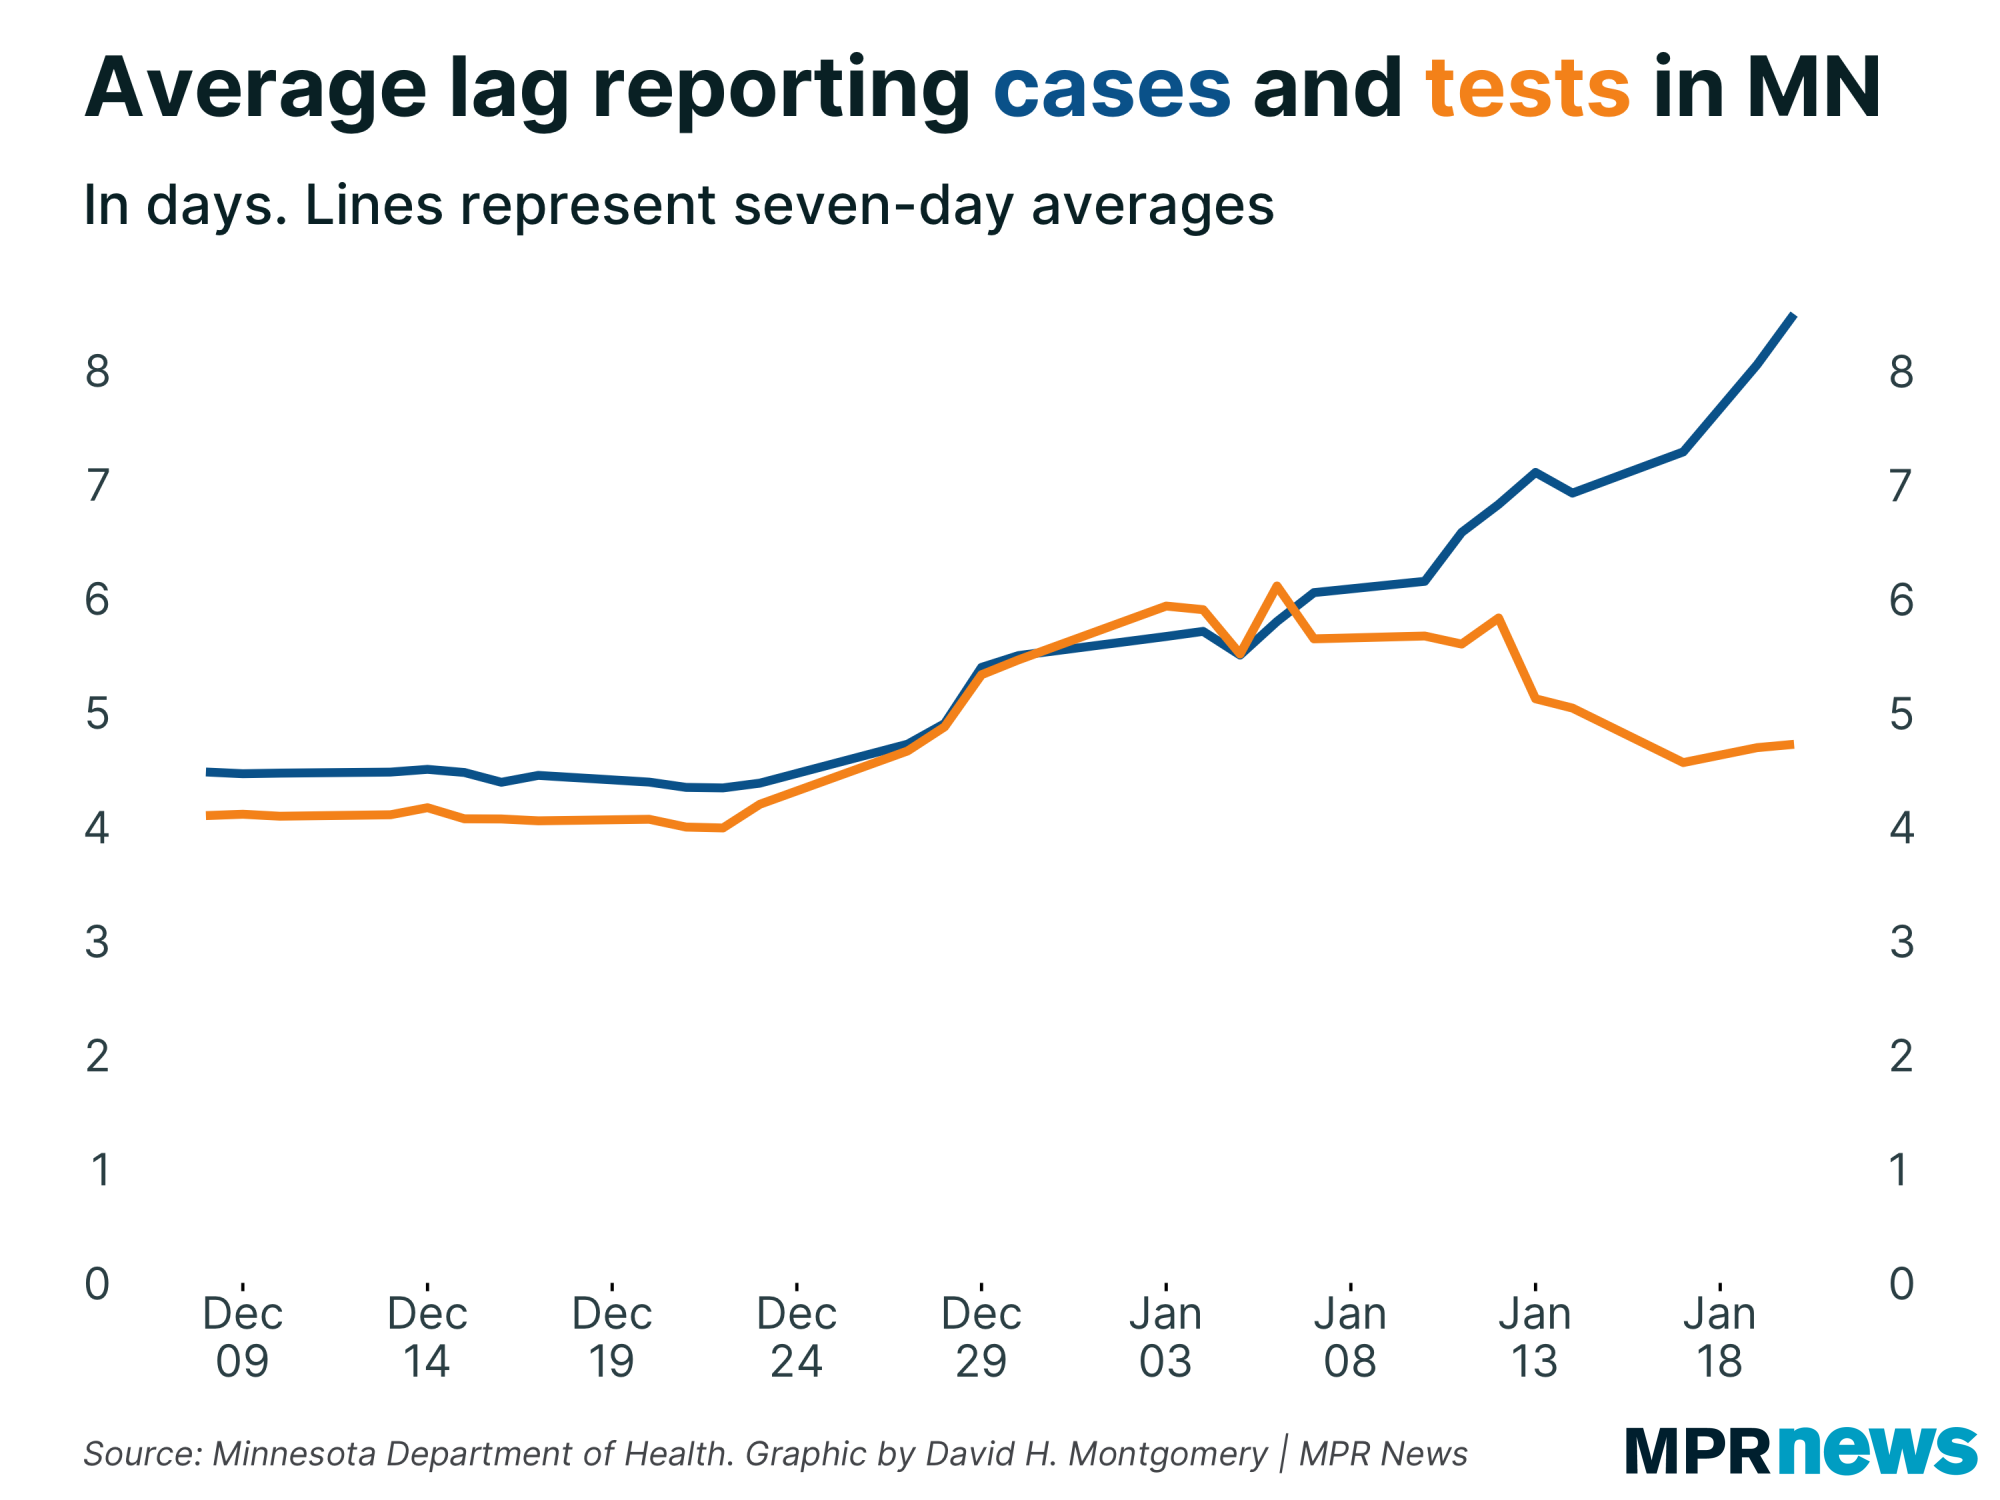 Graph of the average lag in reporting cases and tests in Minnesota